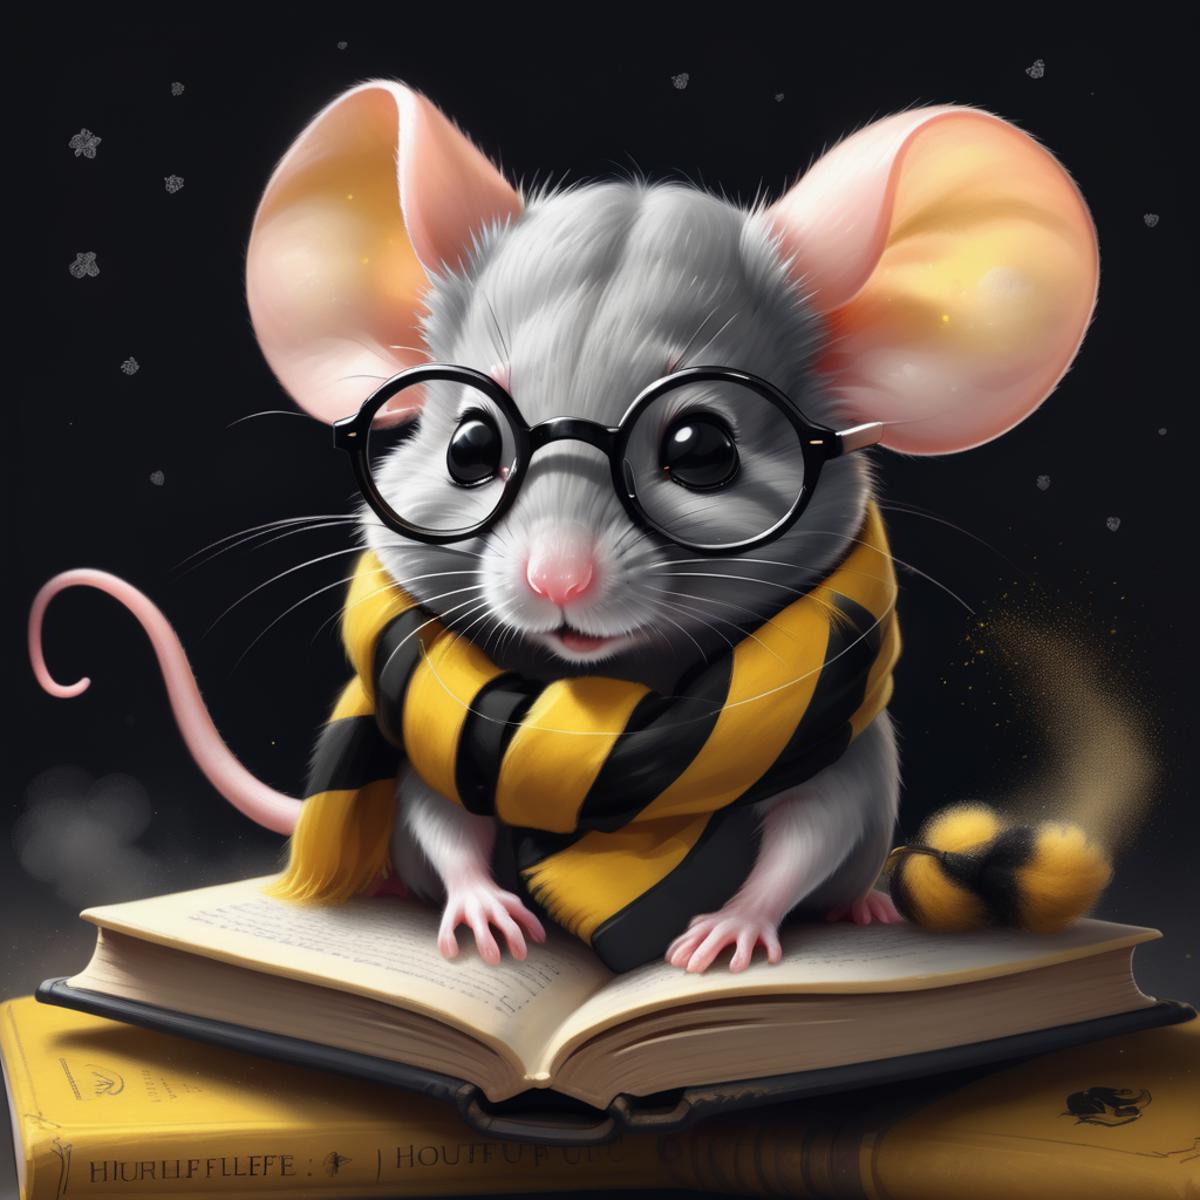 A Glasses-Wearing Mouse Posing with a Book and a Yellow and Black Scarf